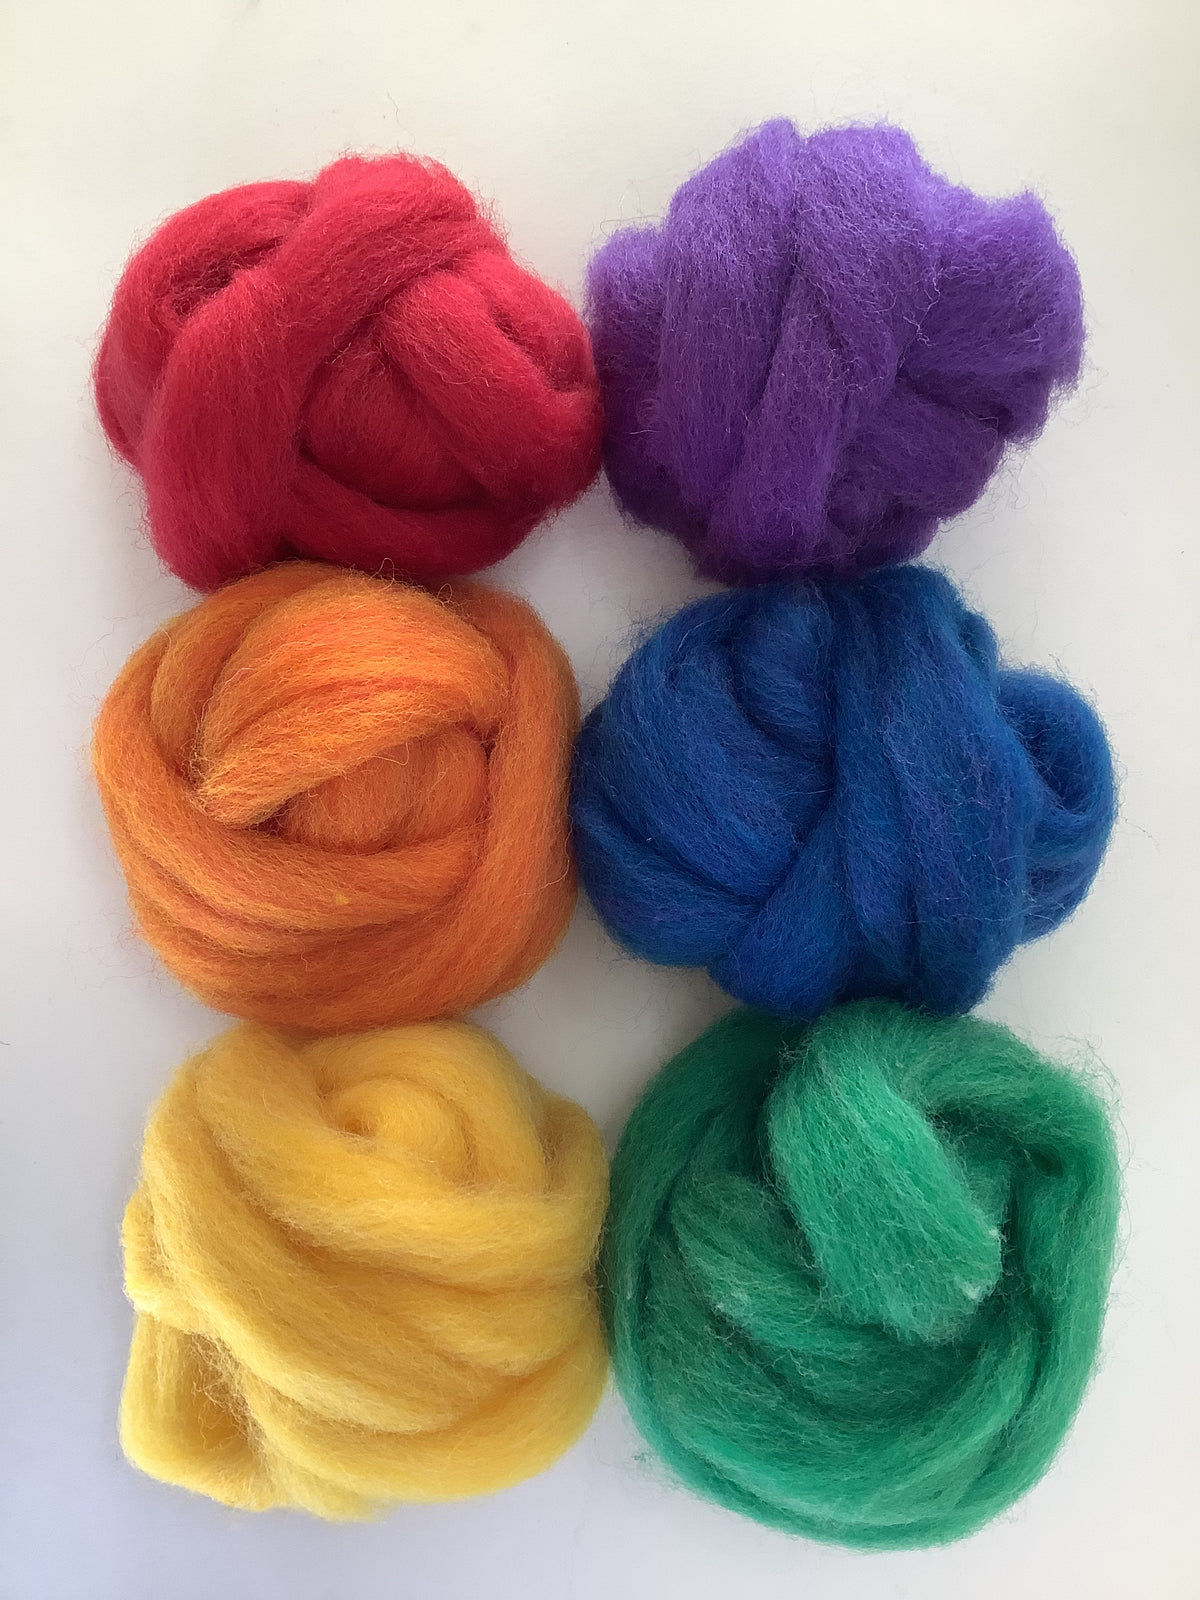 Orange Colors of Wool for Needle Felting | .5 ounce